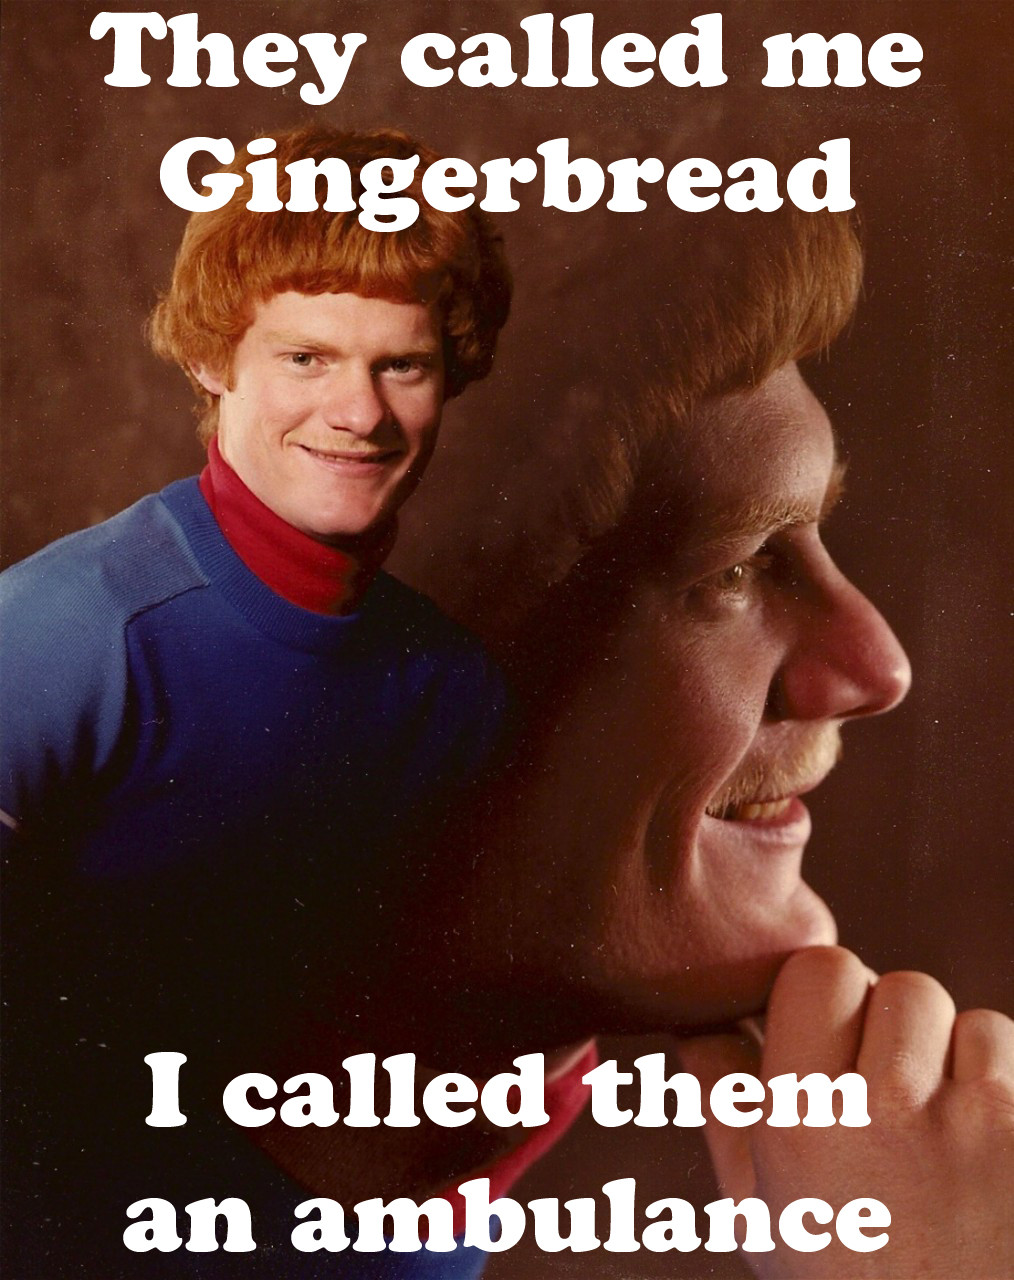 They Called Me Gingerbread Funny Pictures Quotes Pics Photos Images Videos Of Really Very